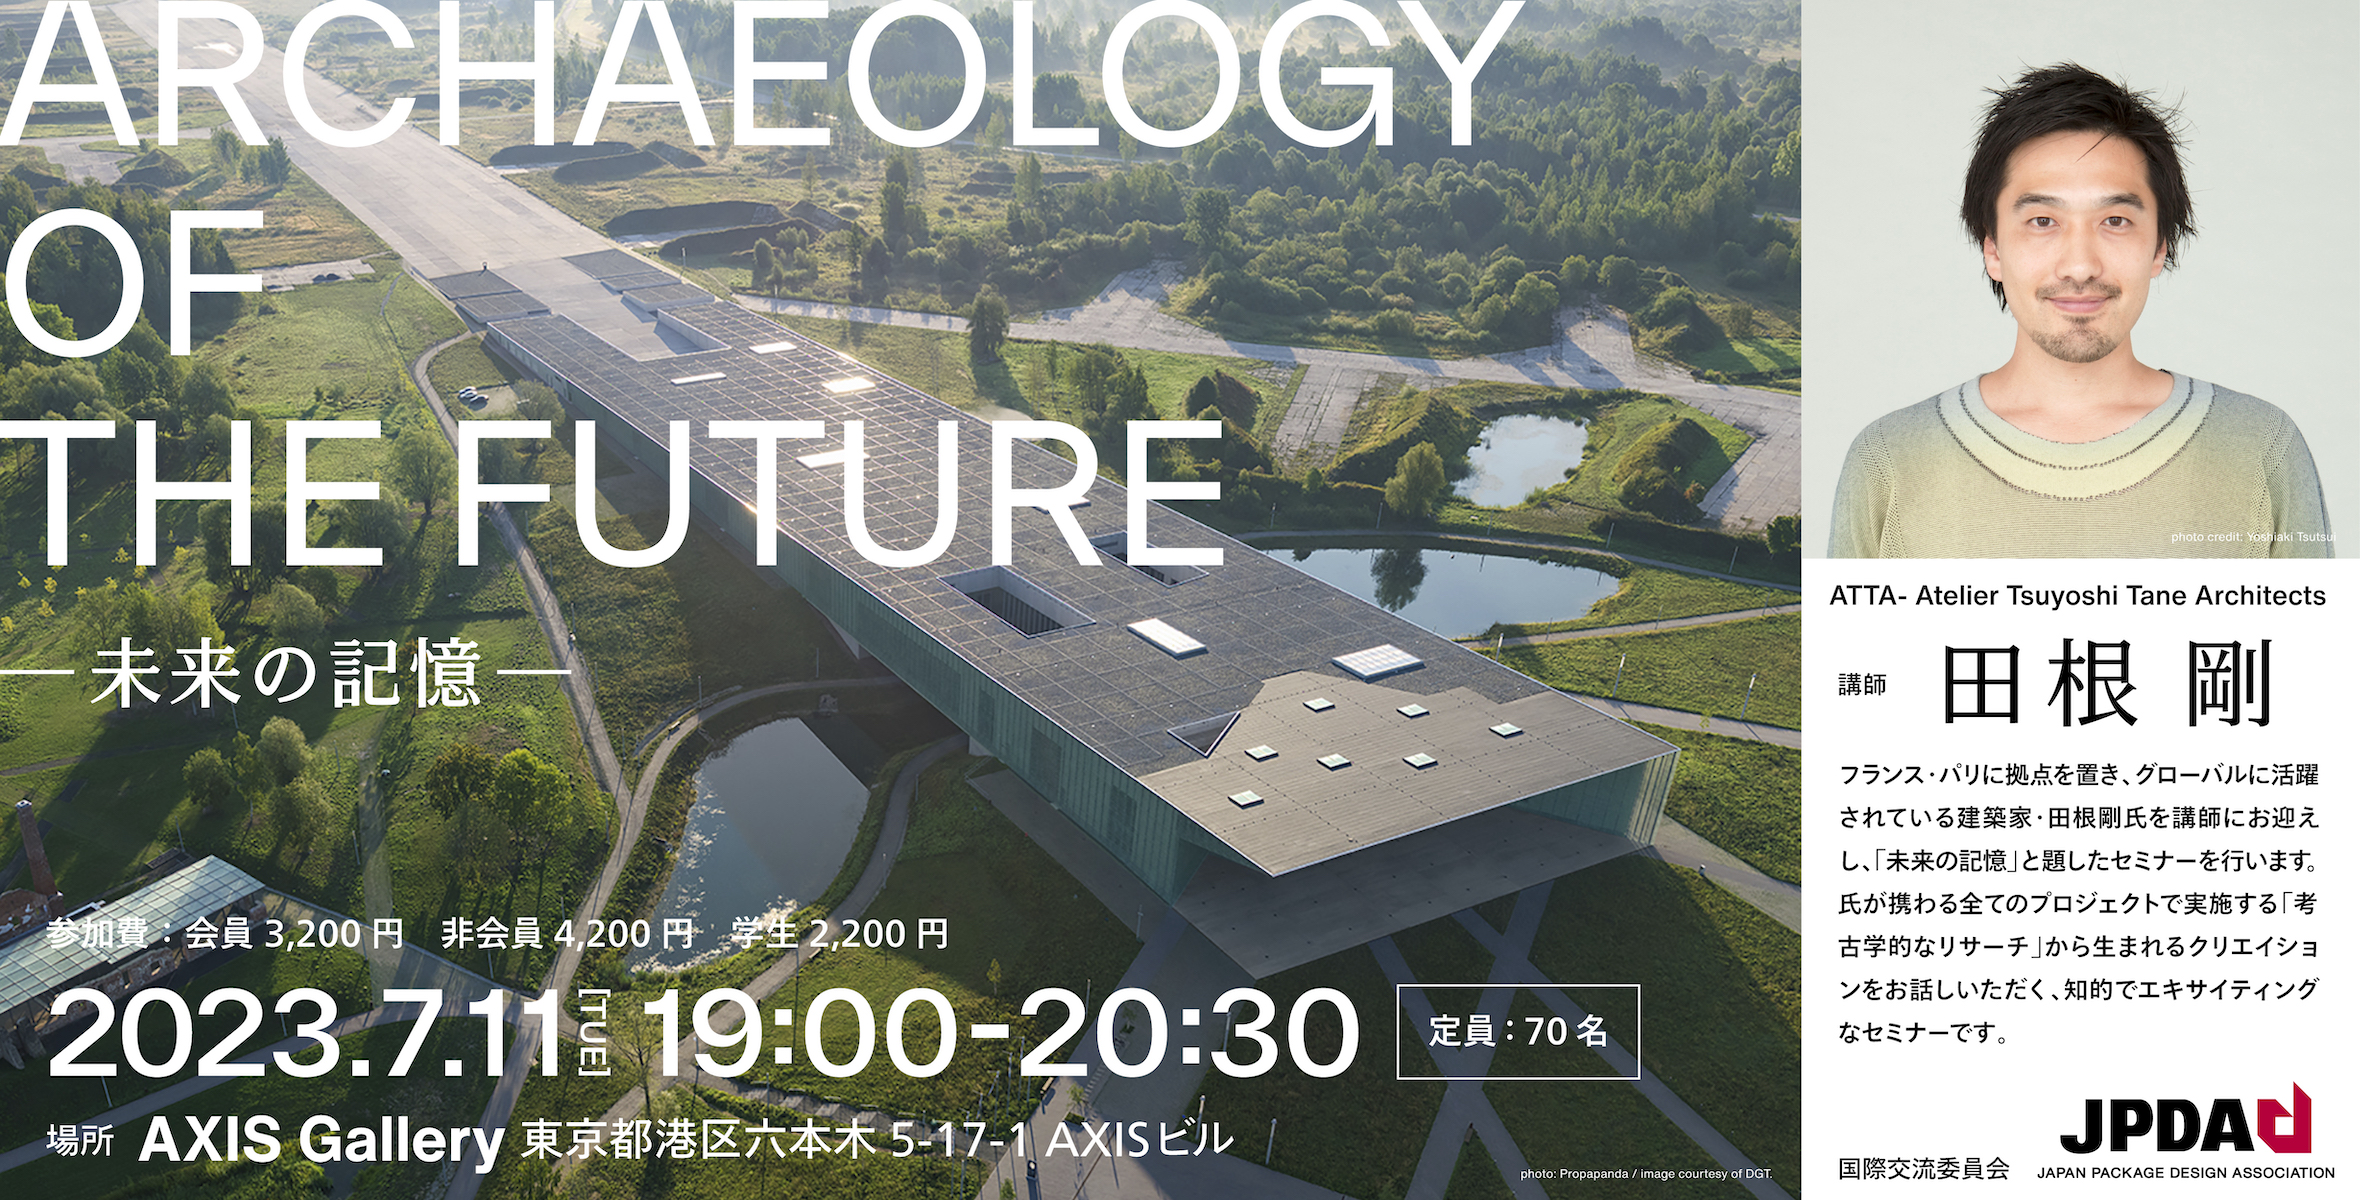 ARCHAEOLOGY OF THE FUTURE ー未来の記憶ーのイメージ